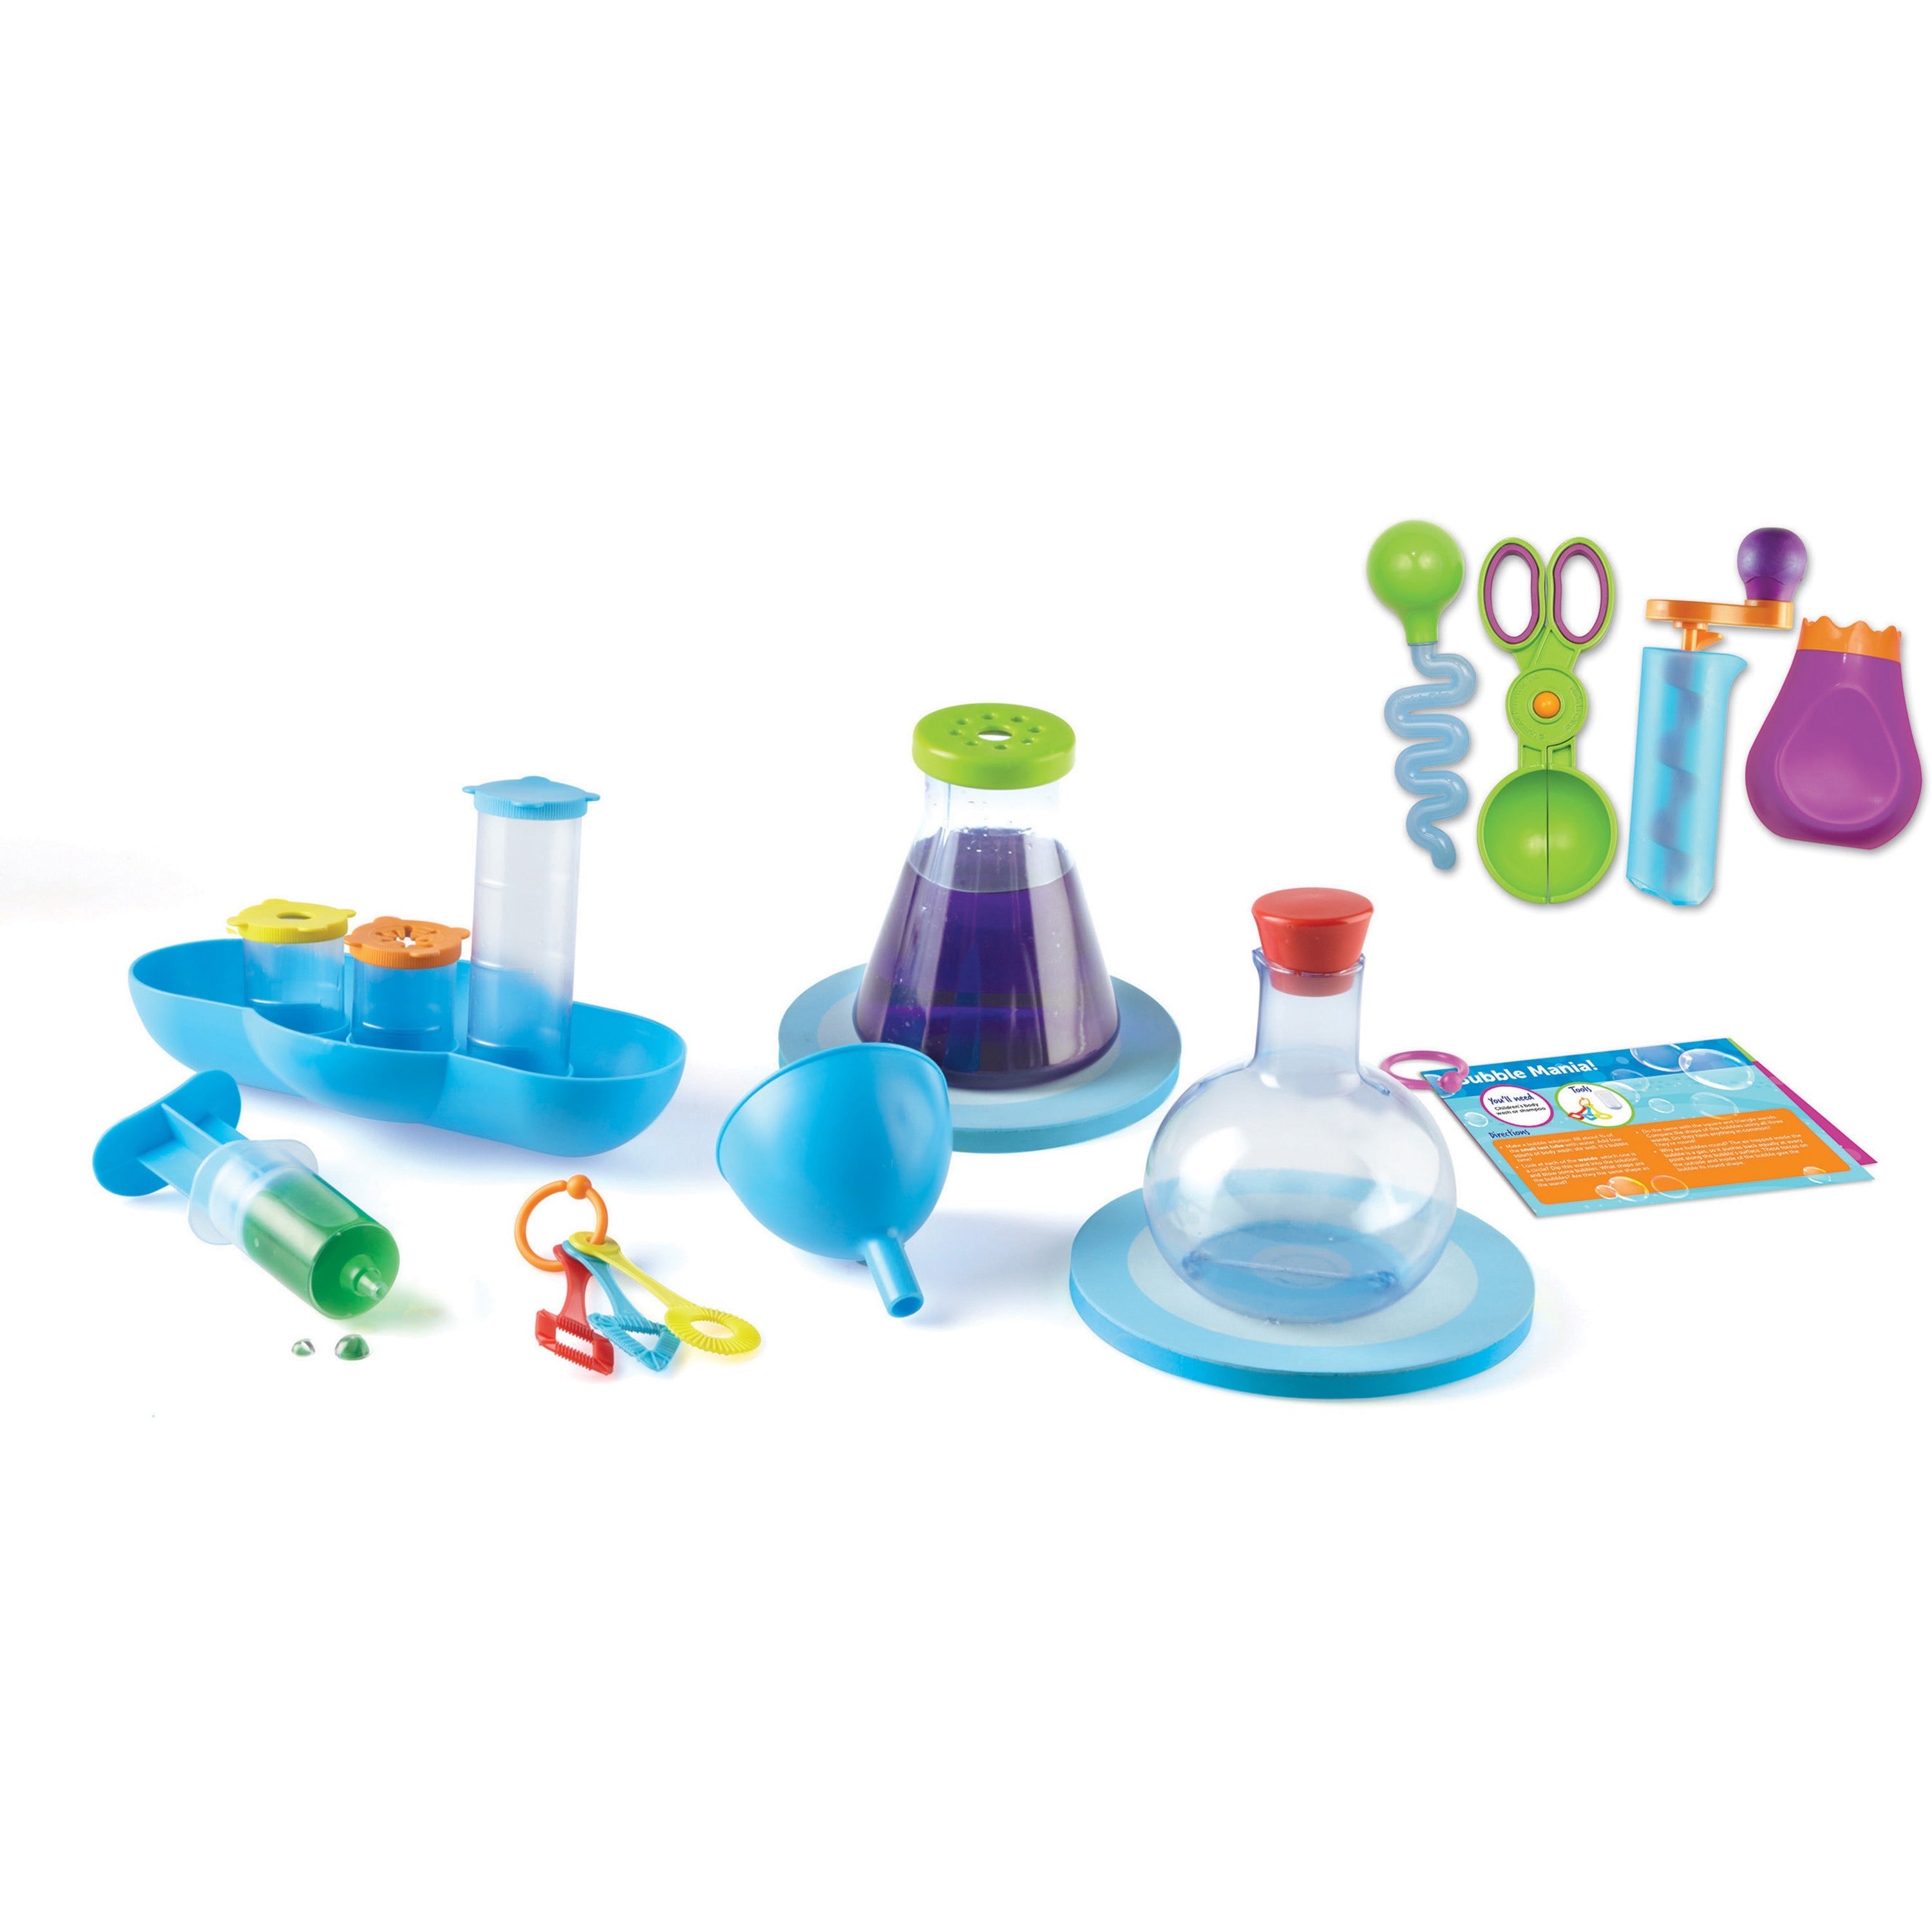 learning-resources-splashology!-water-lab-classroom-set-theme-subject-learning-fun-skill-learning-science-experiment-science-technology-engineering-mathematics-volume-buoyancy-3-year-1-set_lrnler2946 - 1